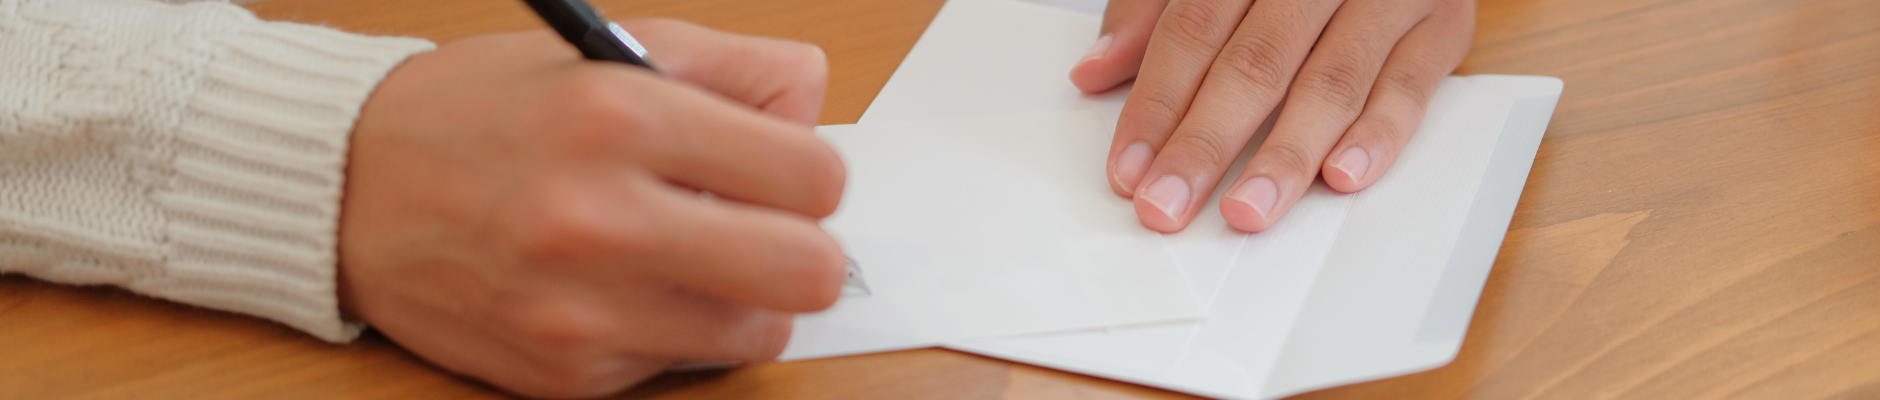 hands writing on a blank greeting card